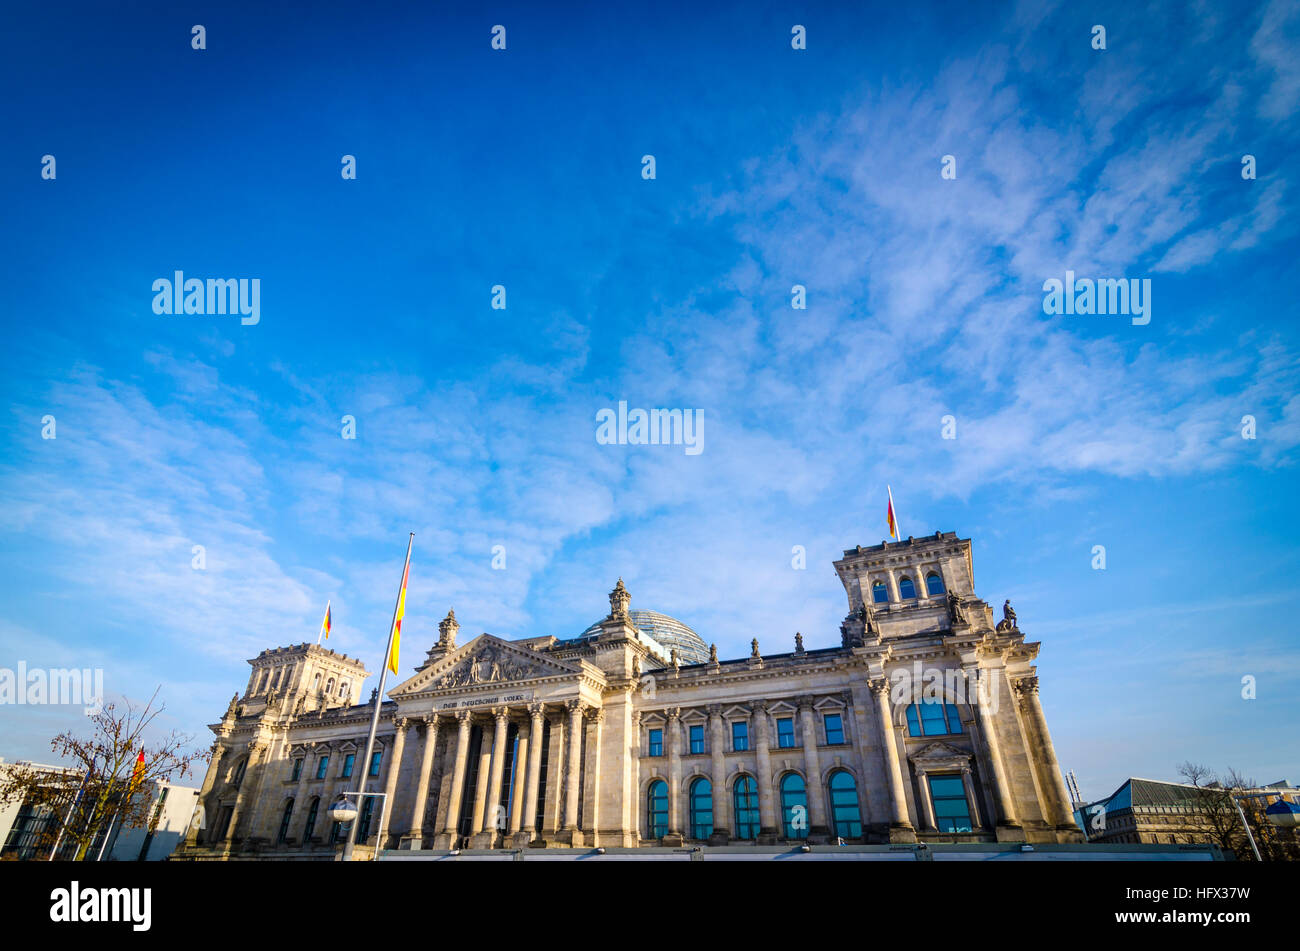 Reichstag Building / Reichstagsgebäude.. German parliament building in a Neo-Renaissance style. Berlin, Germany Stock Photo